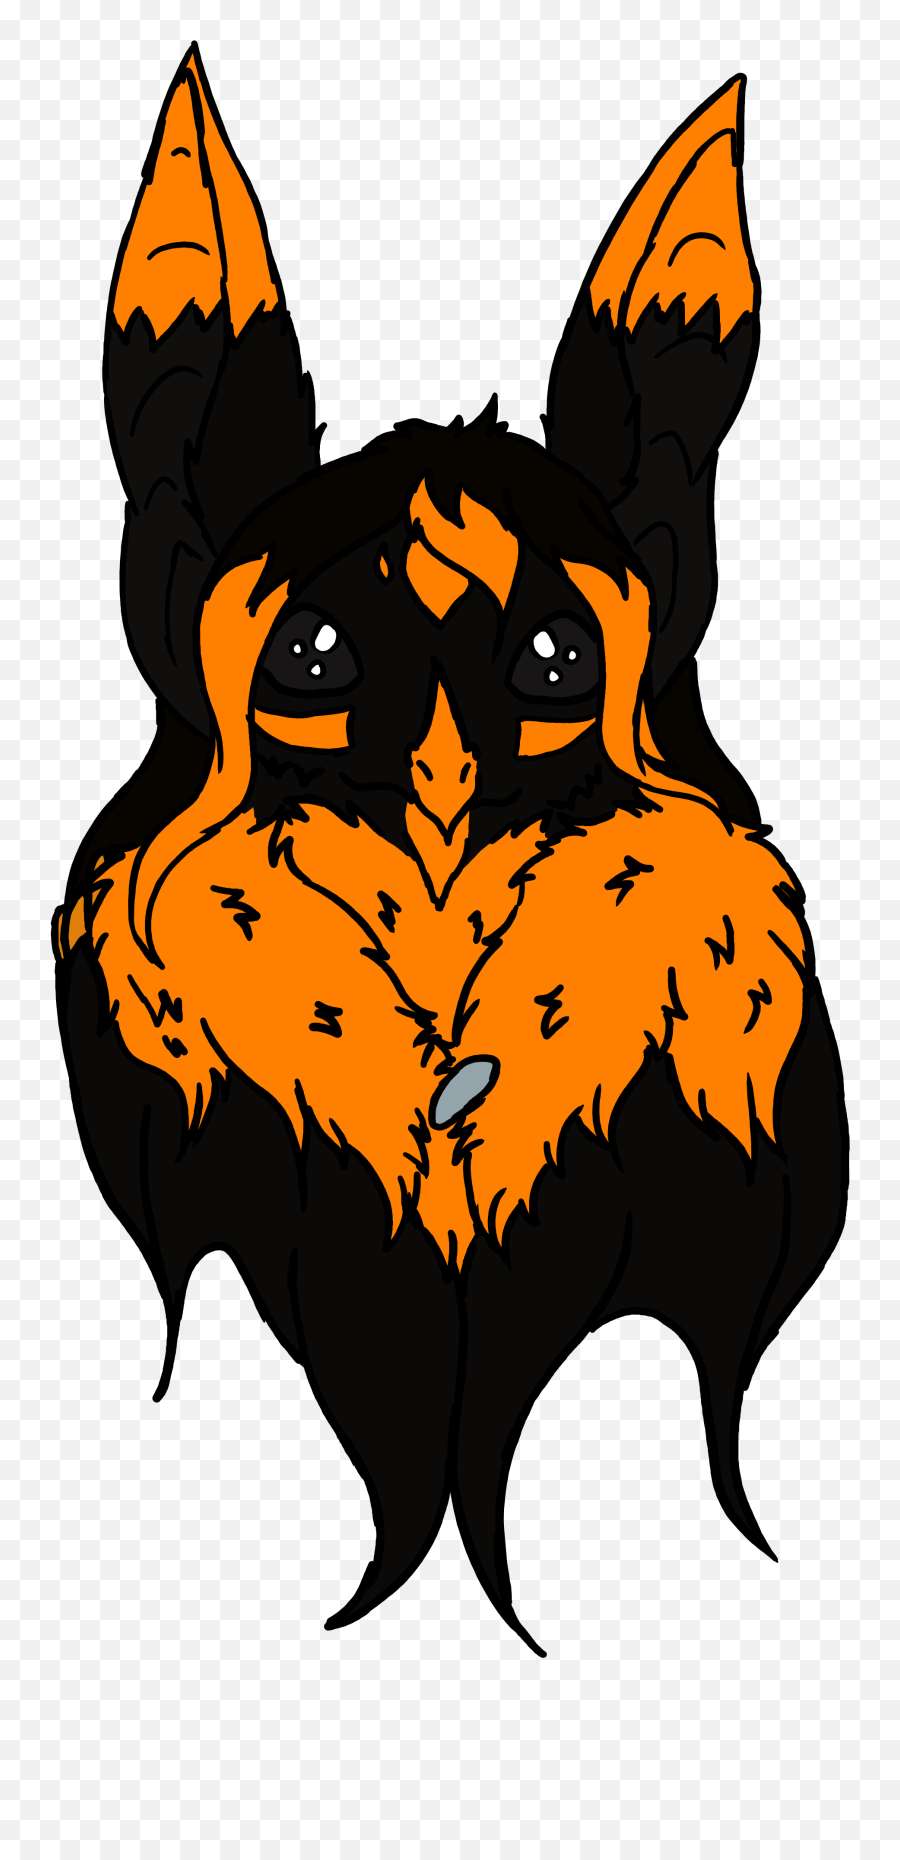 Jynxlurk Discord Emote 19 By Treepelt97 - Fur Affinity Automotive Decal Emoji,Characters Workers 7 Discord Emoticon